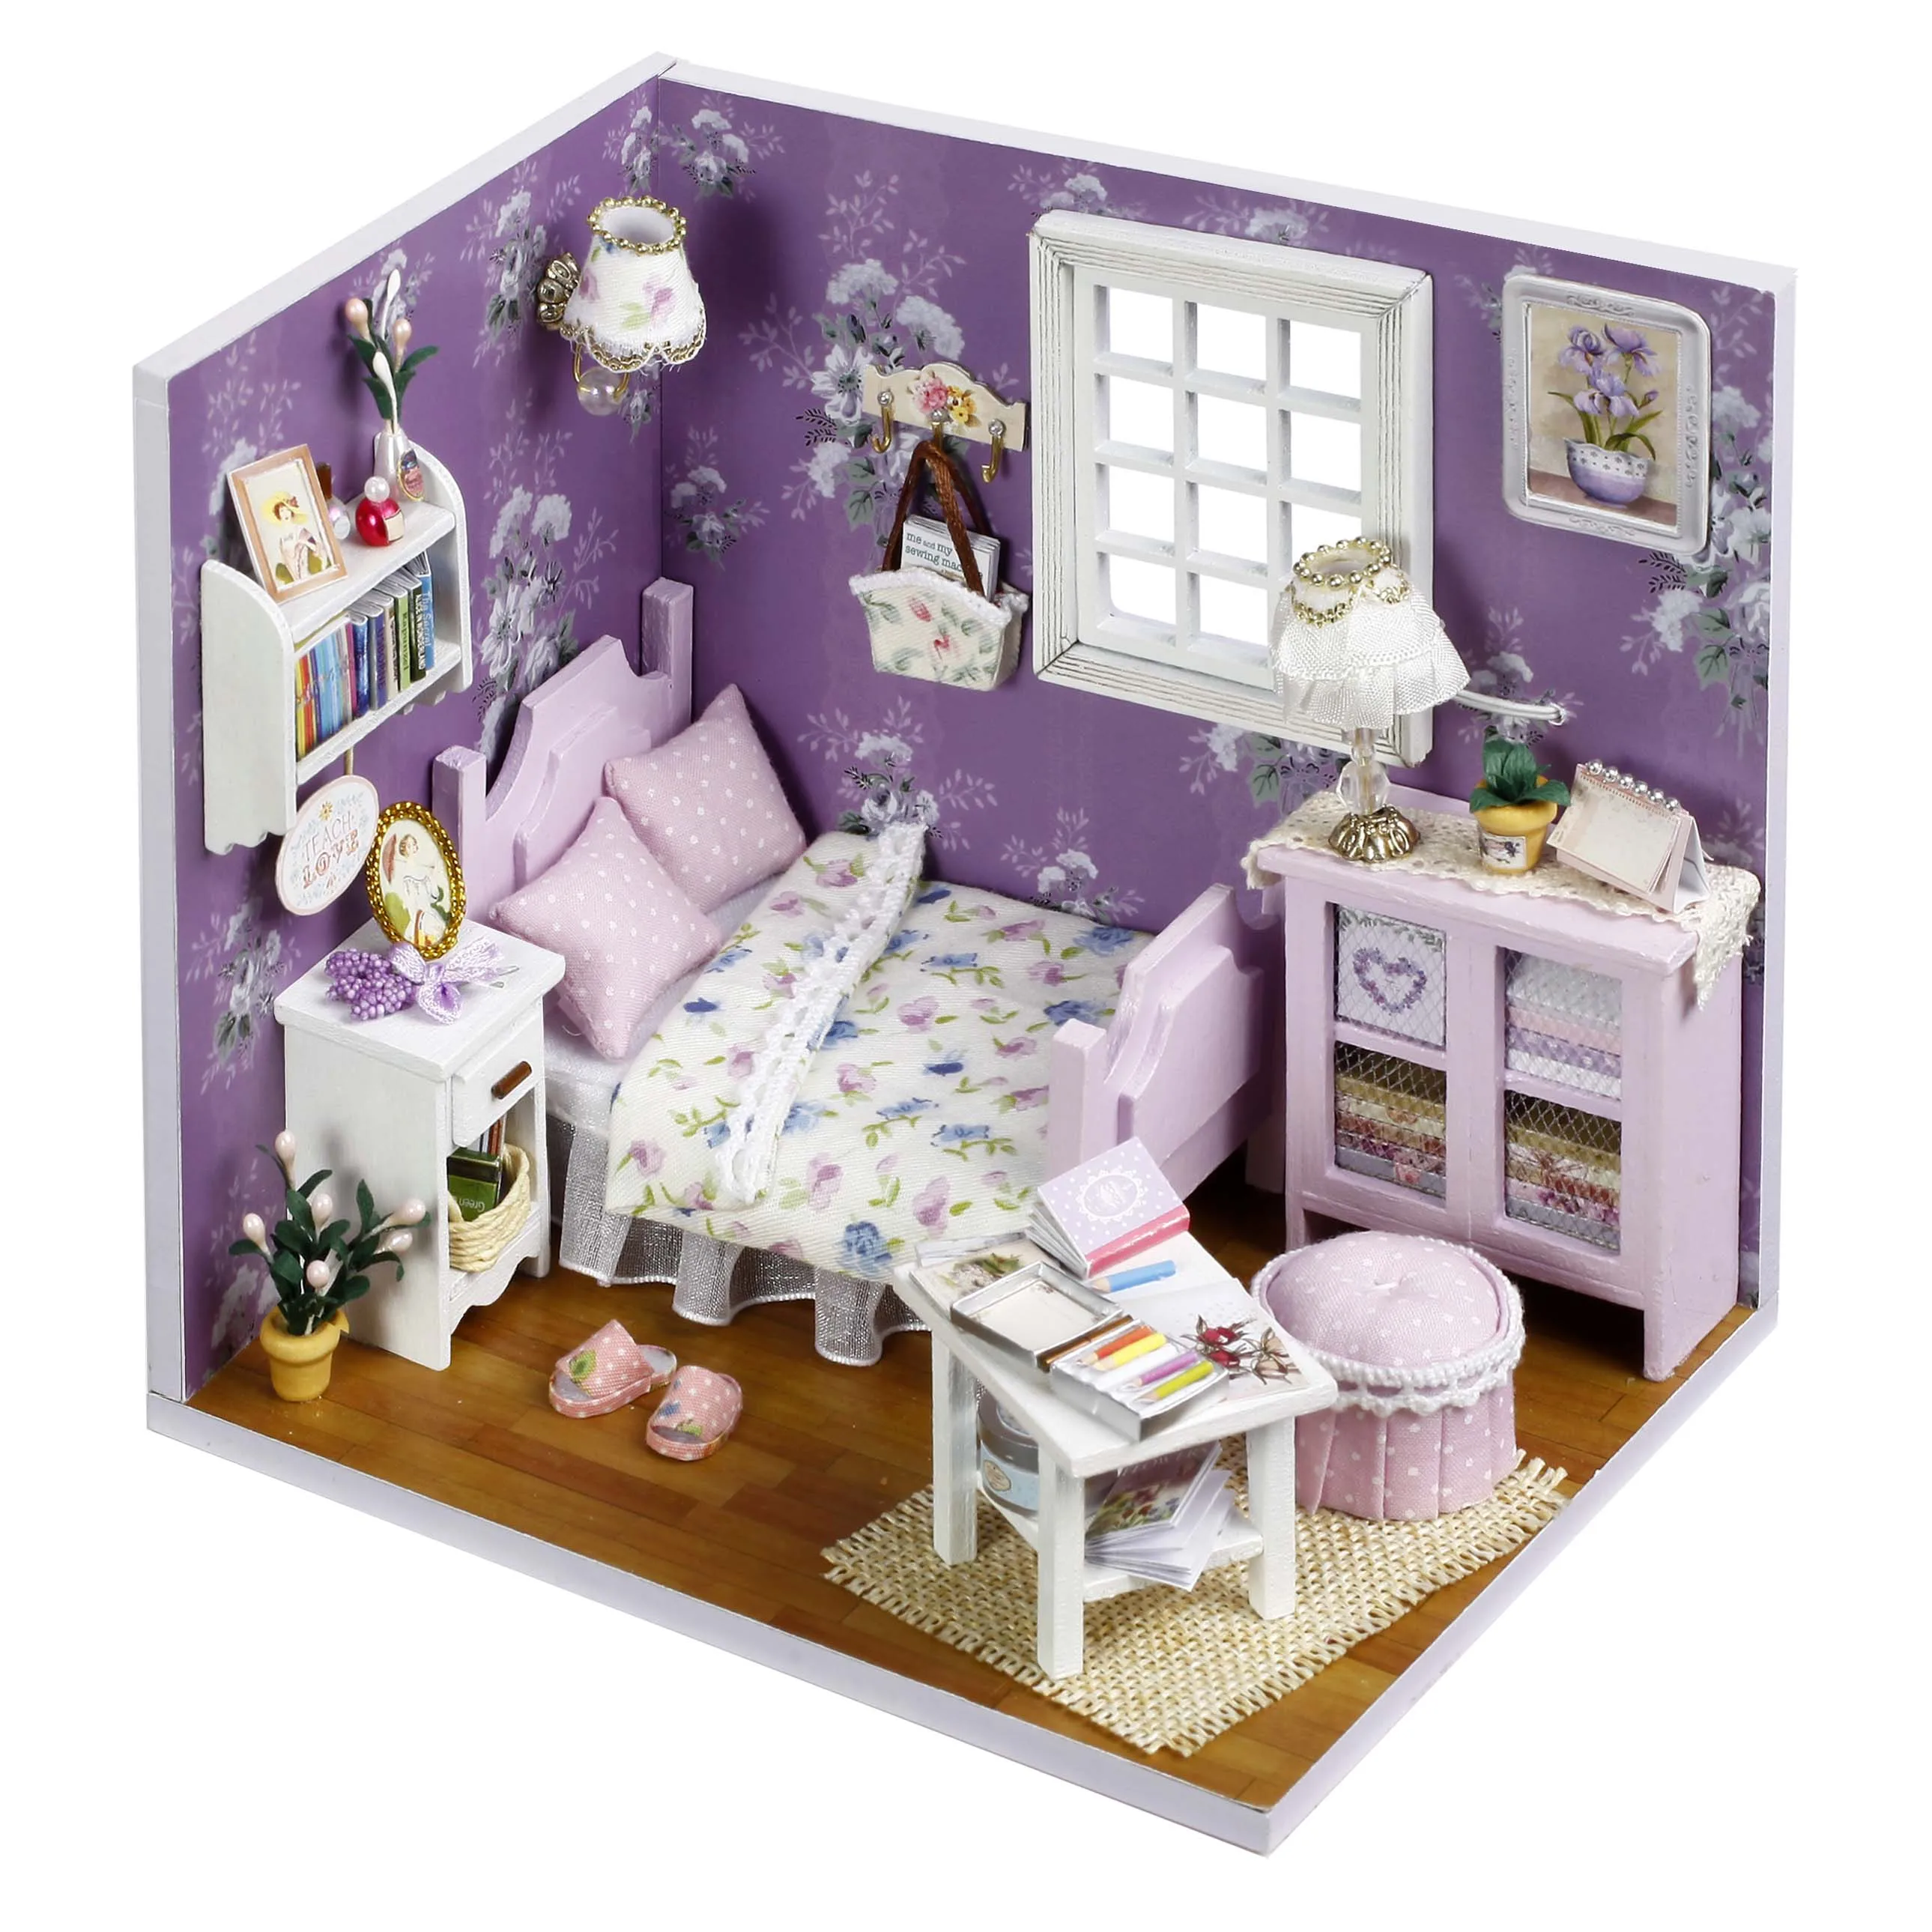 

DIY Model Doll House Casa Miniature Dollhouse with Furnitures LED 3D Wooden House Toys For Children Gift Handmade Crafts H001 #E